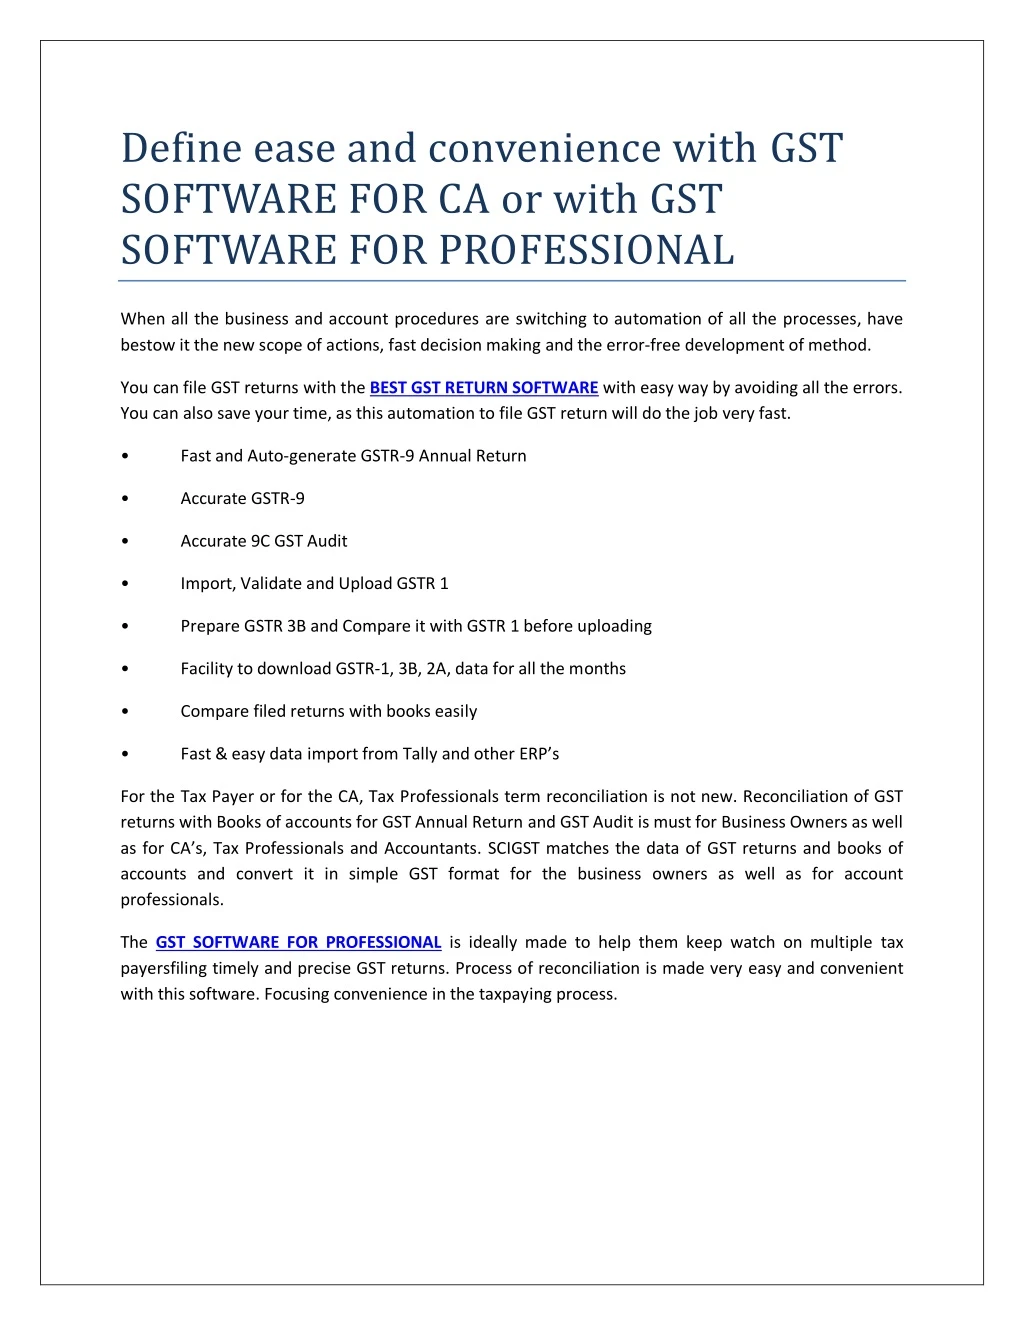 define ease and convenience with gst software